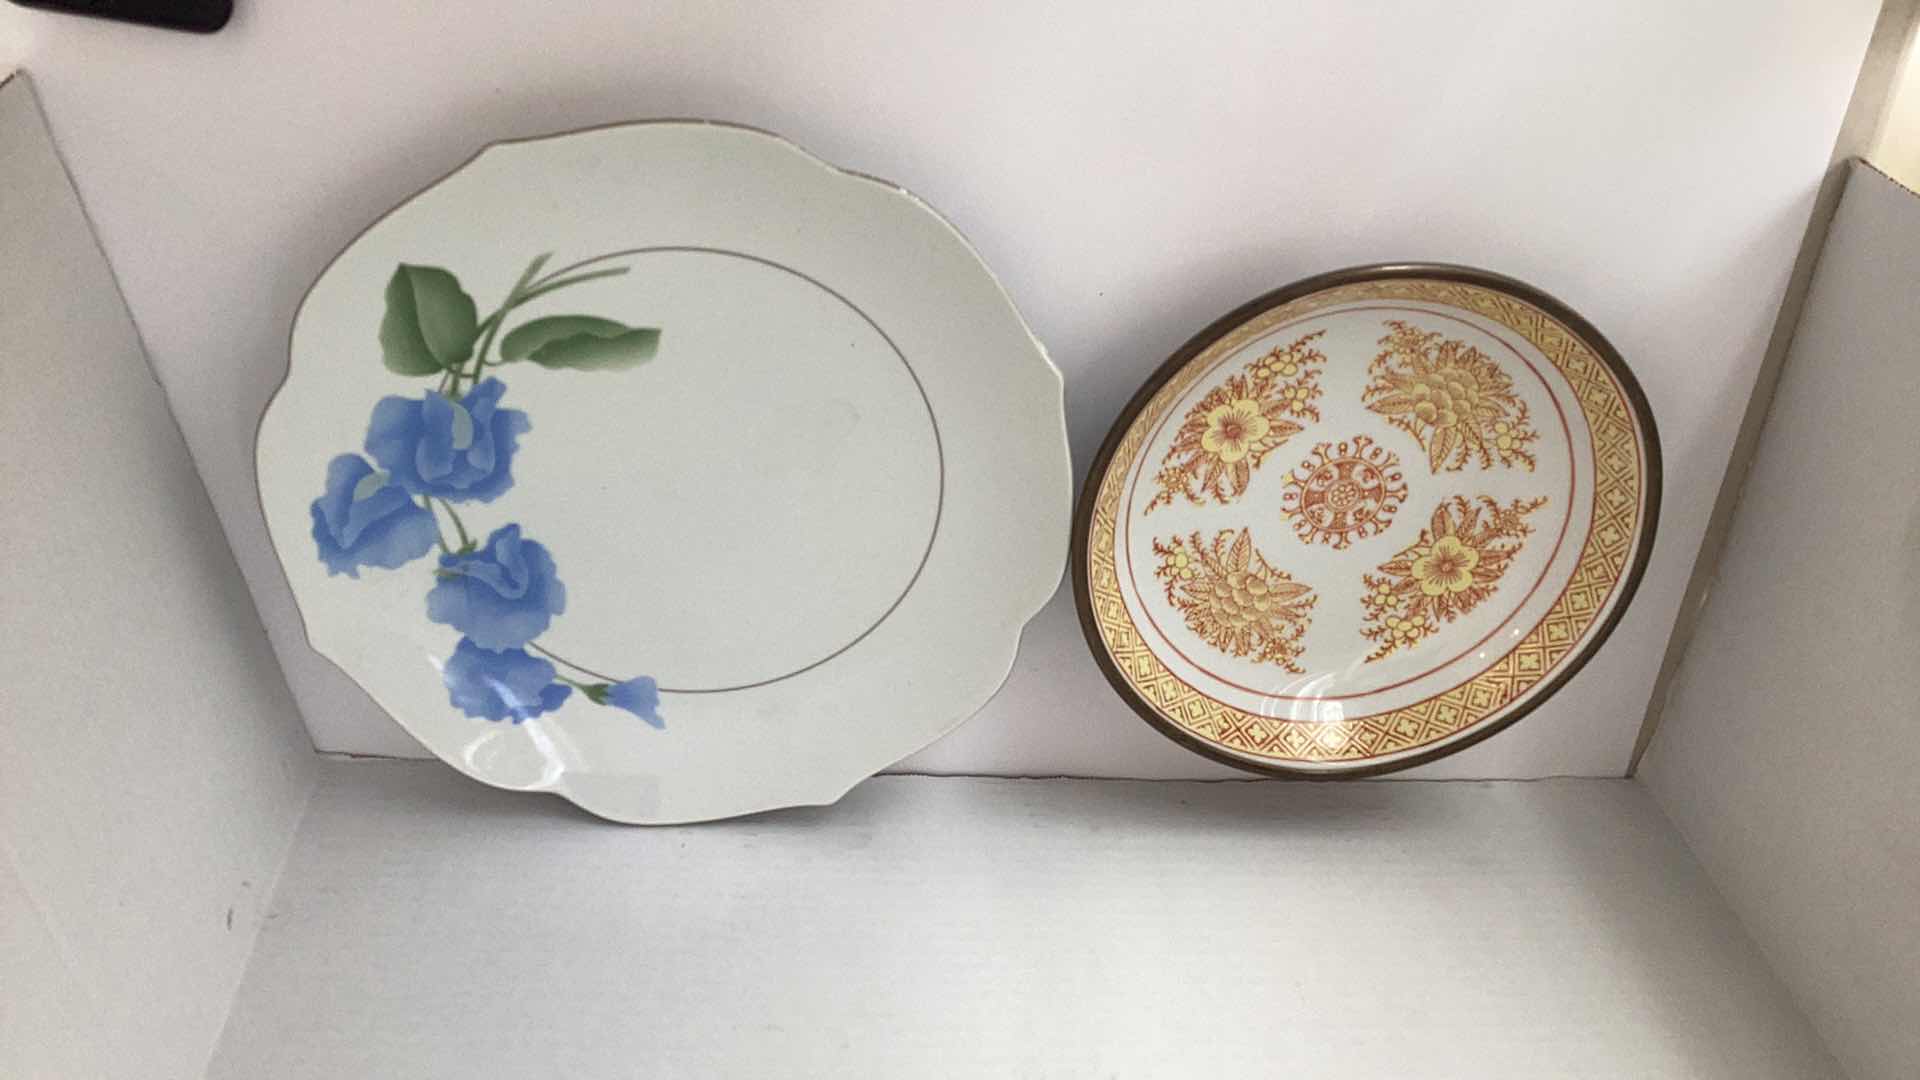 Photo 1 of PAIR OF JAPANESE INSPIRED SERVING PLATES, LARGEST IS 12” WIDE